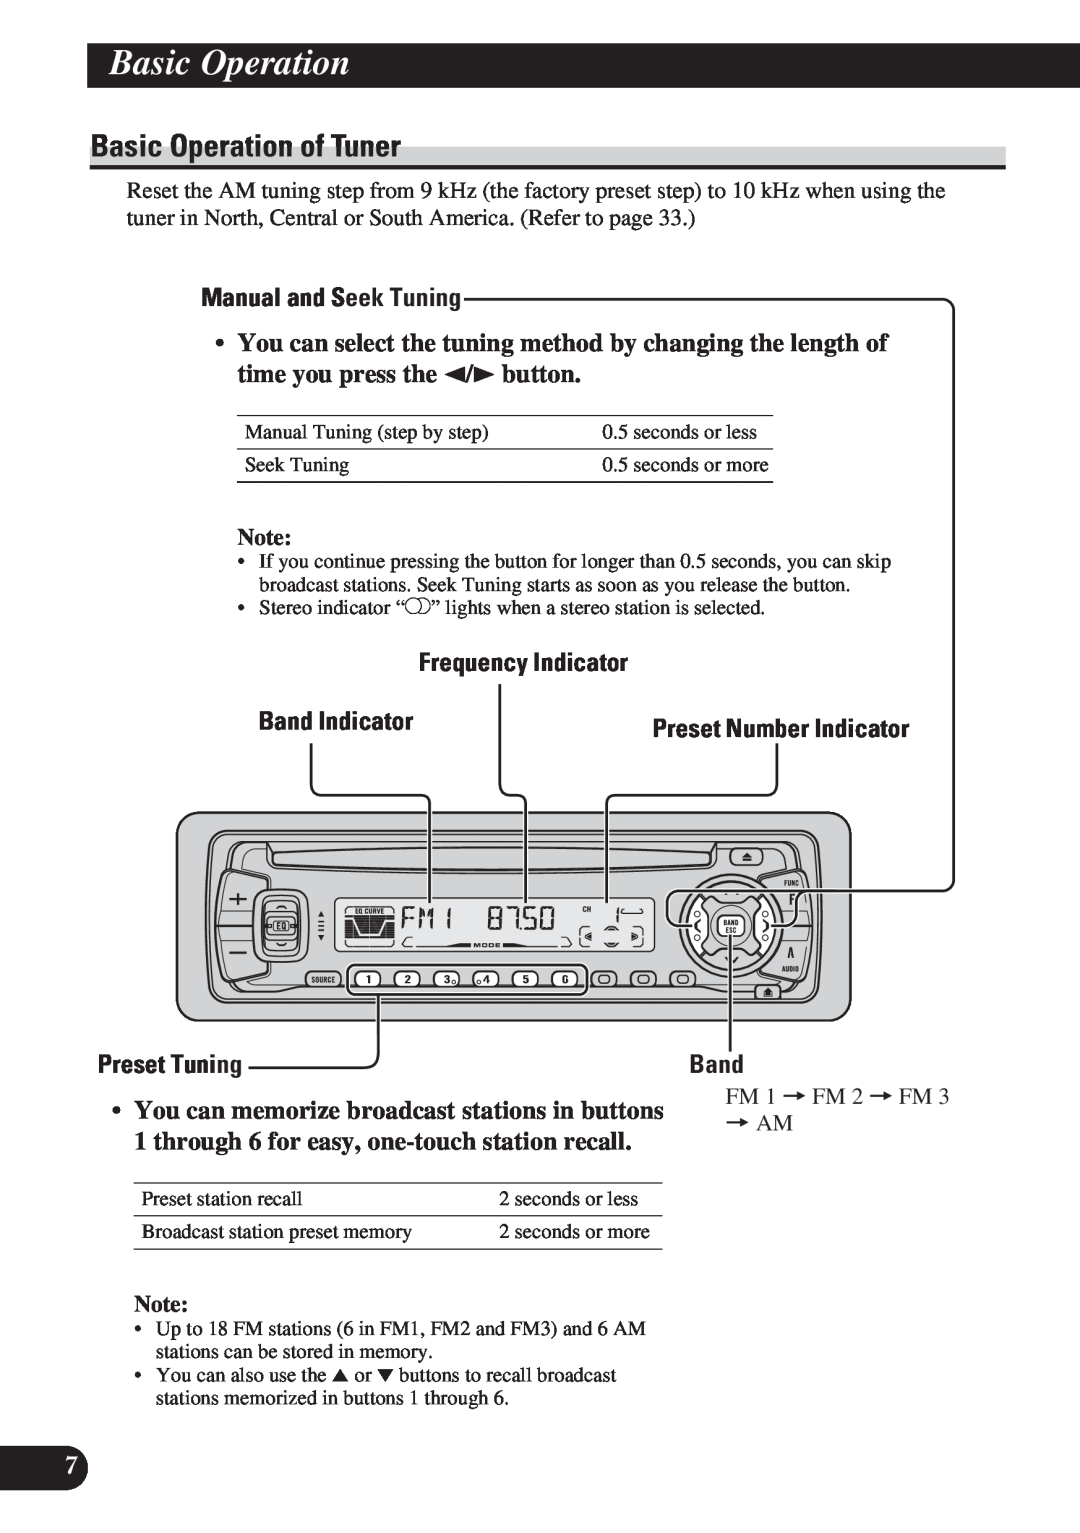 Pioneer DEH-P4150 Basic Operation of Tuner, Manual and Seek Tuning, Frequency Indicator, Preset Tuning, Band 